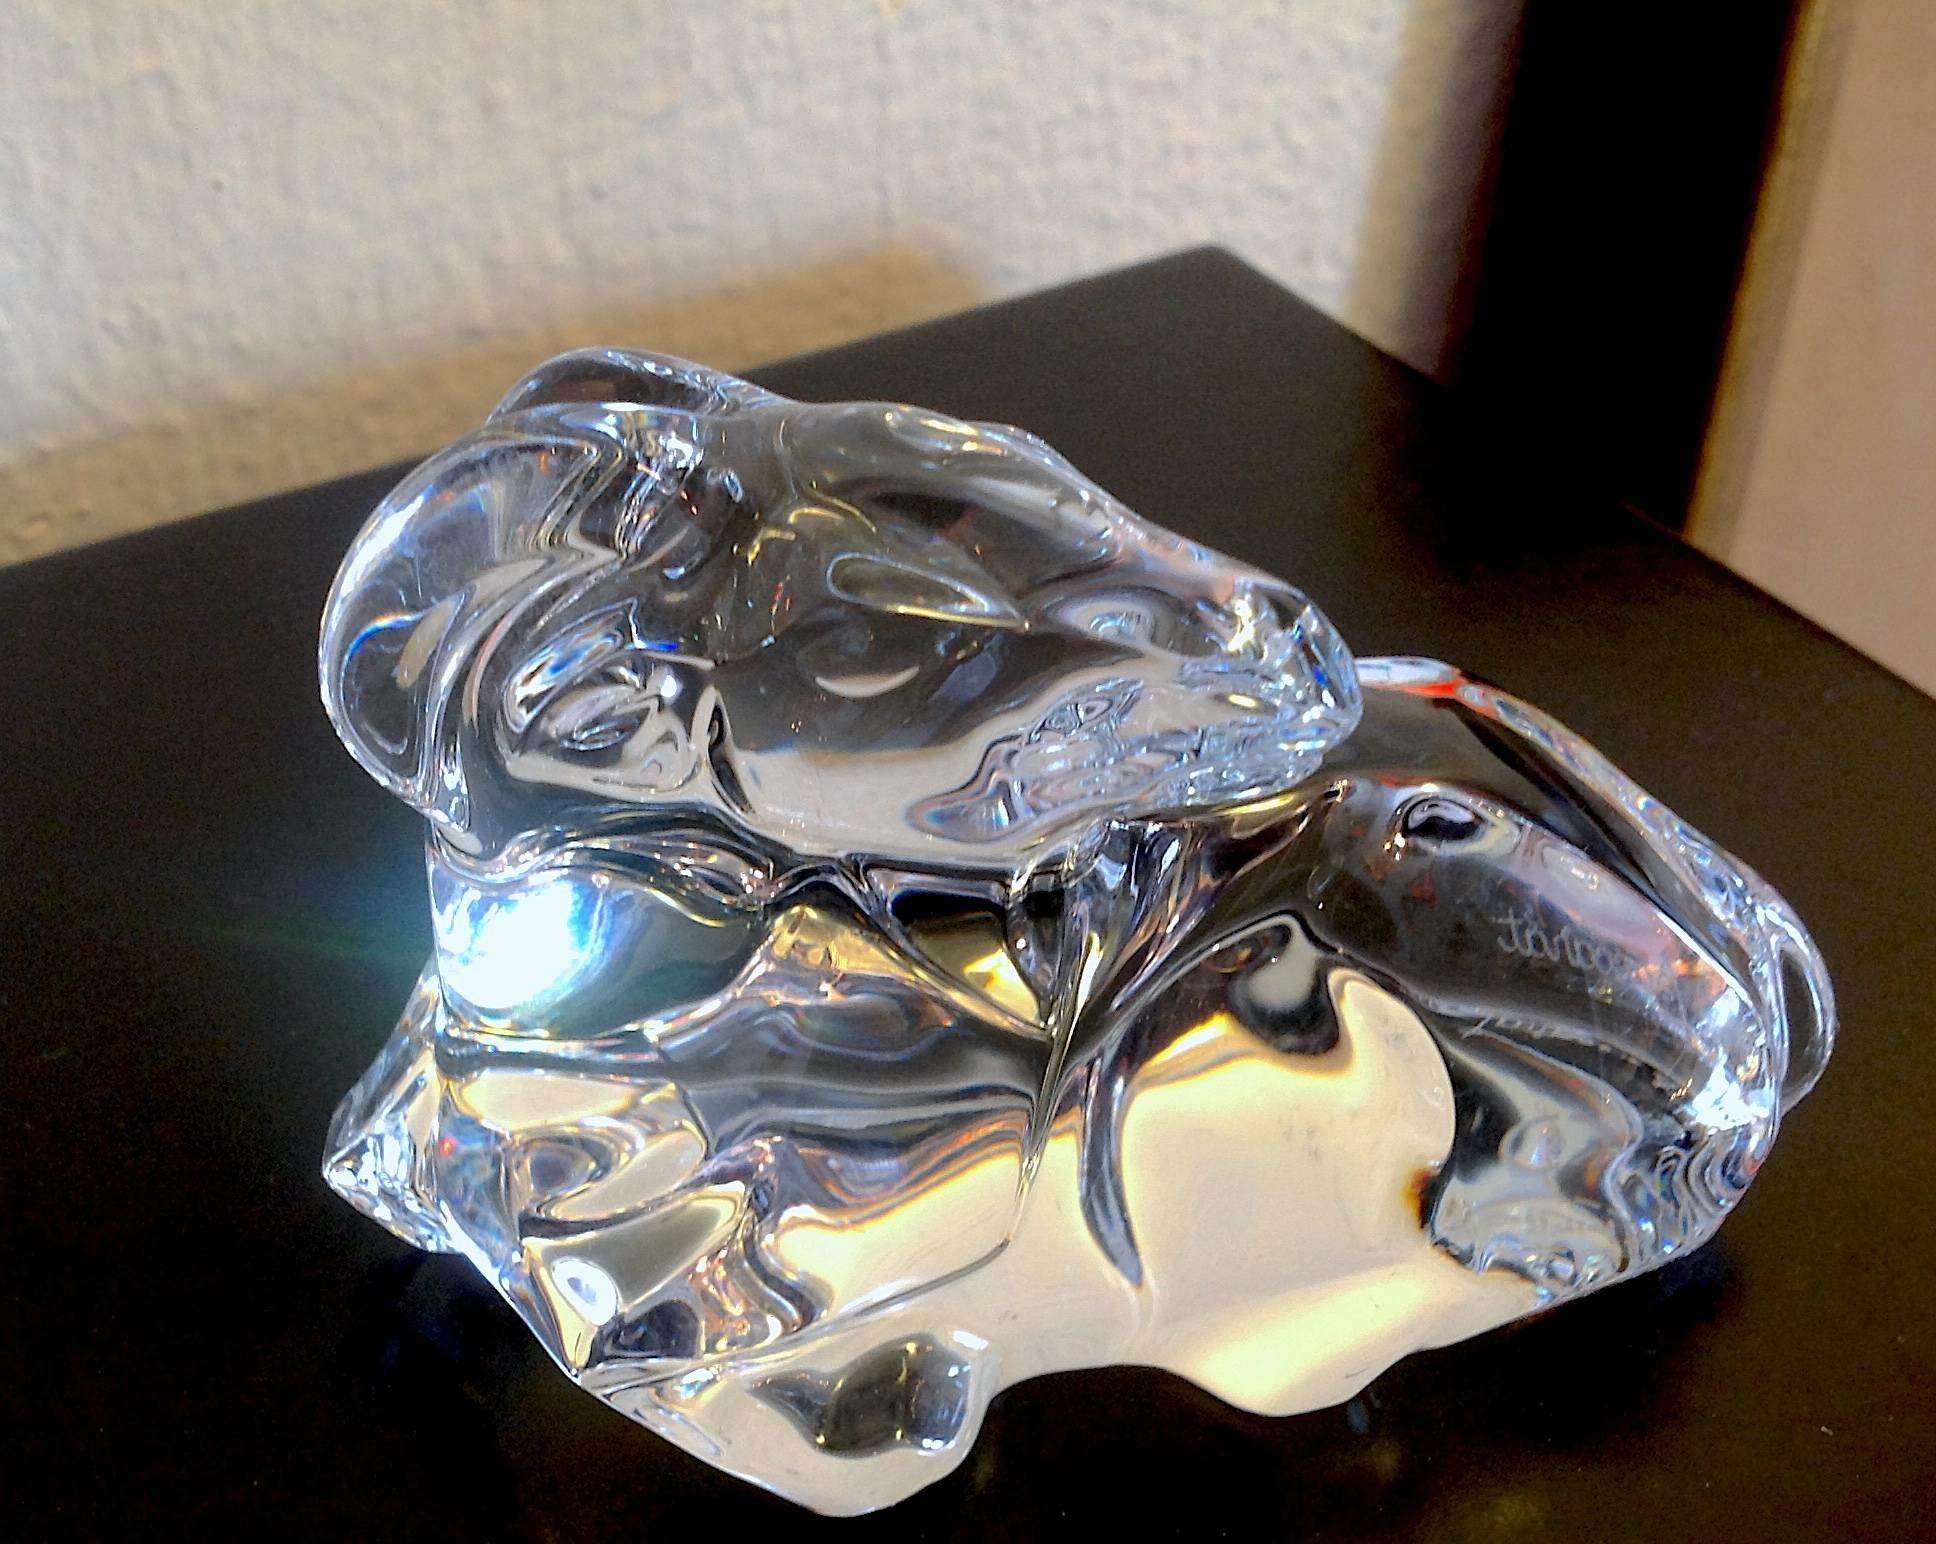 Baccarat crystal ram figurine, acid etched Baccarat signature on side and stamp on bottom. Measures: 2.5" high and 4.25" wide. Aaccessory to crystal nativity scene.